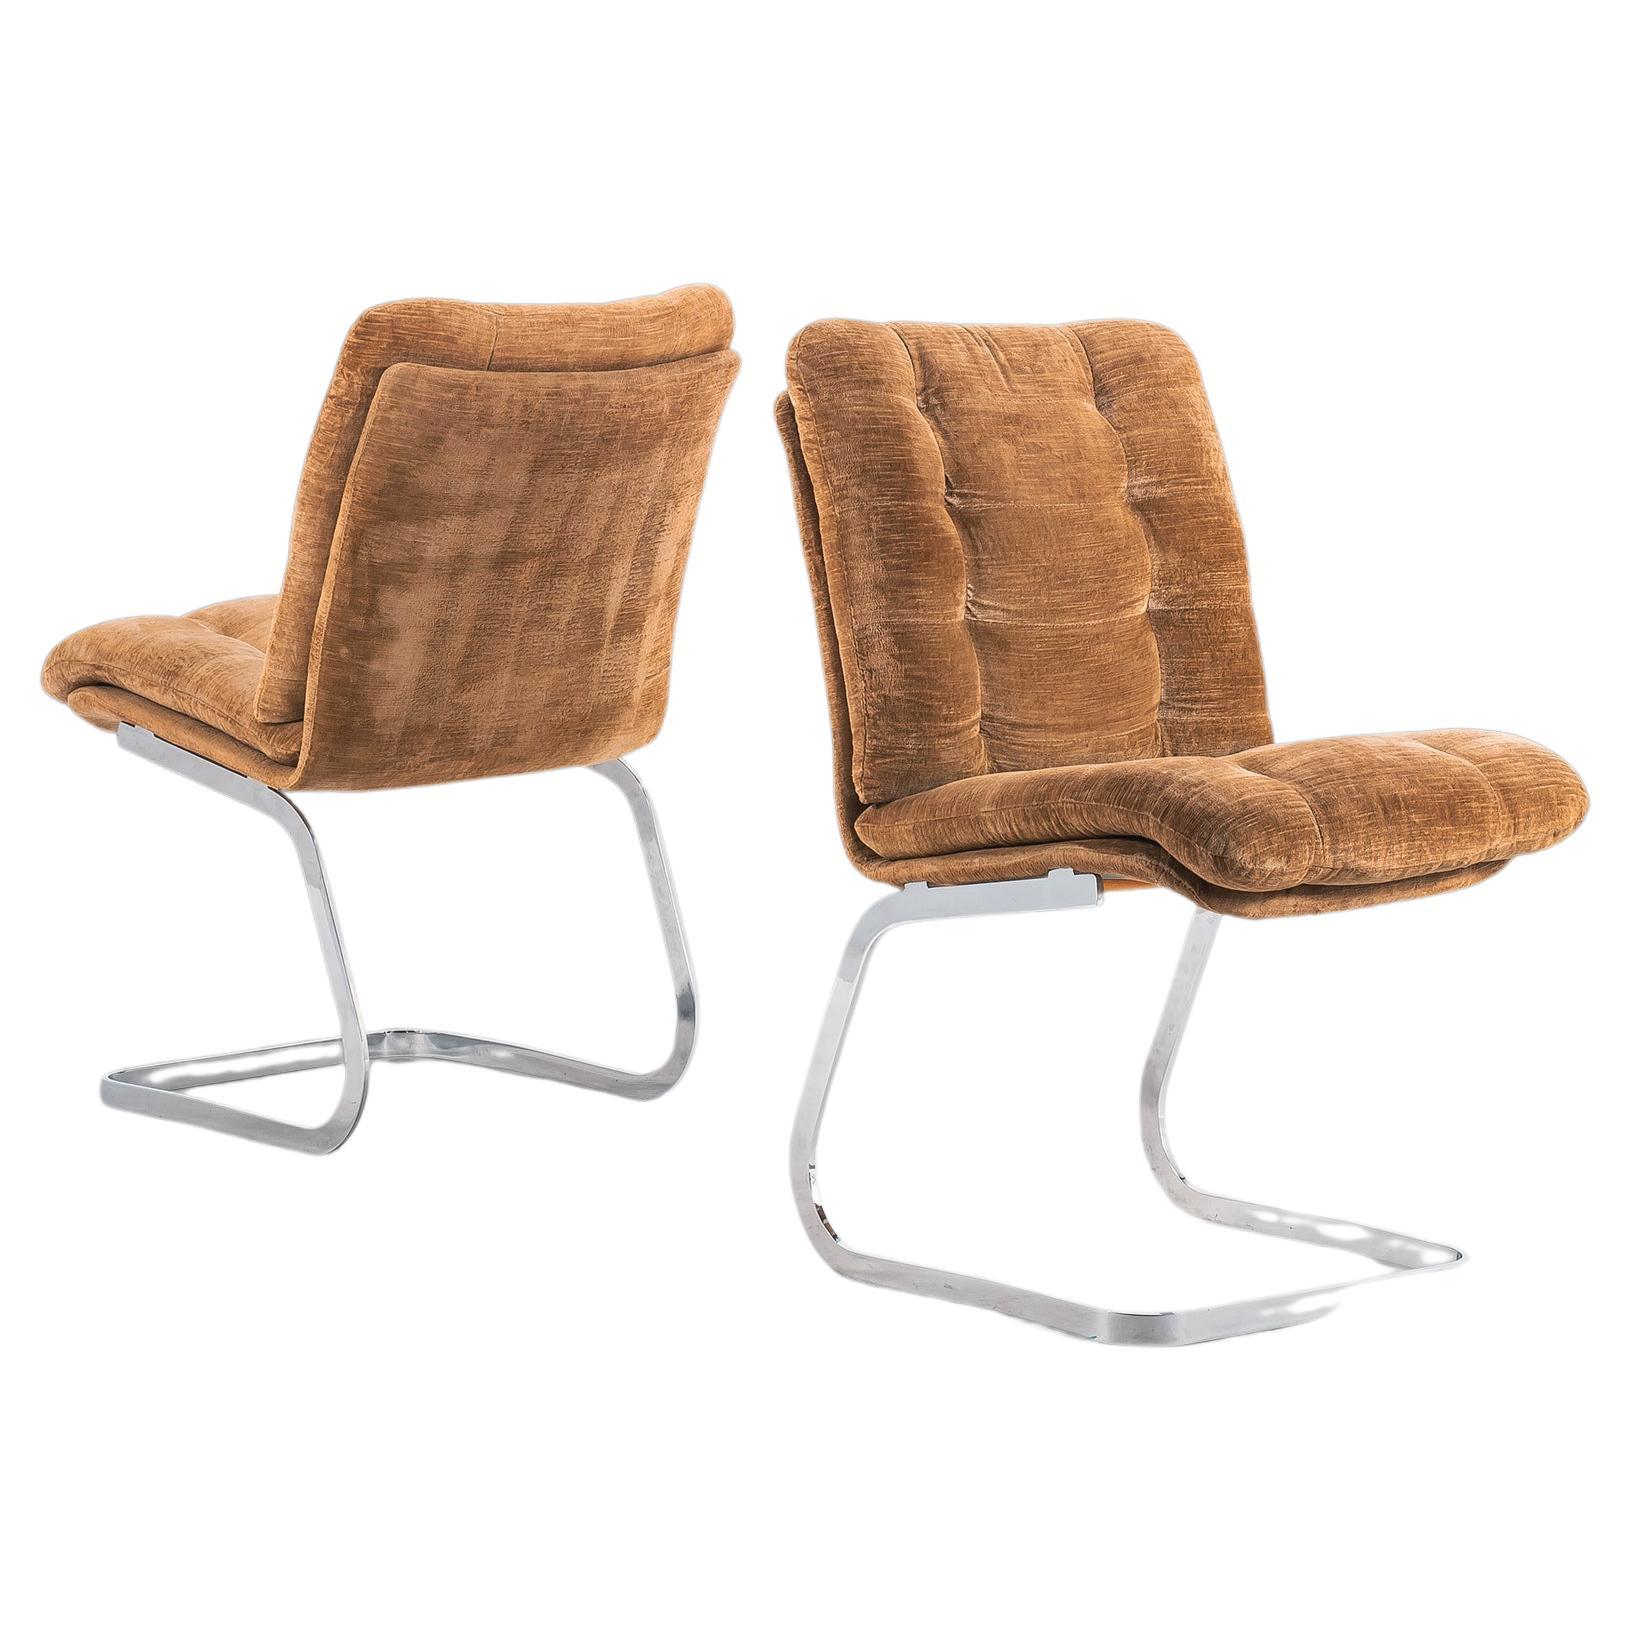 Set of Two '2' Mid Century Cantilever Chairs by Roche Bobois, France, c. 1970's For Sale